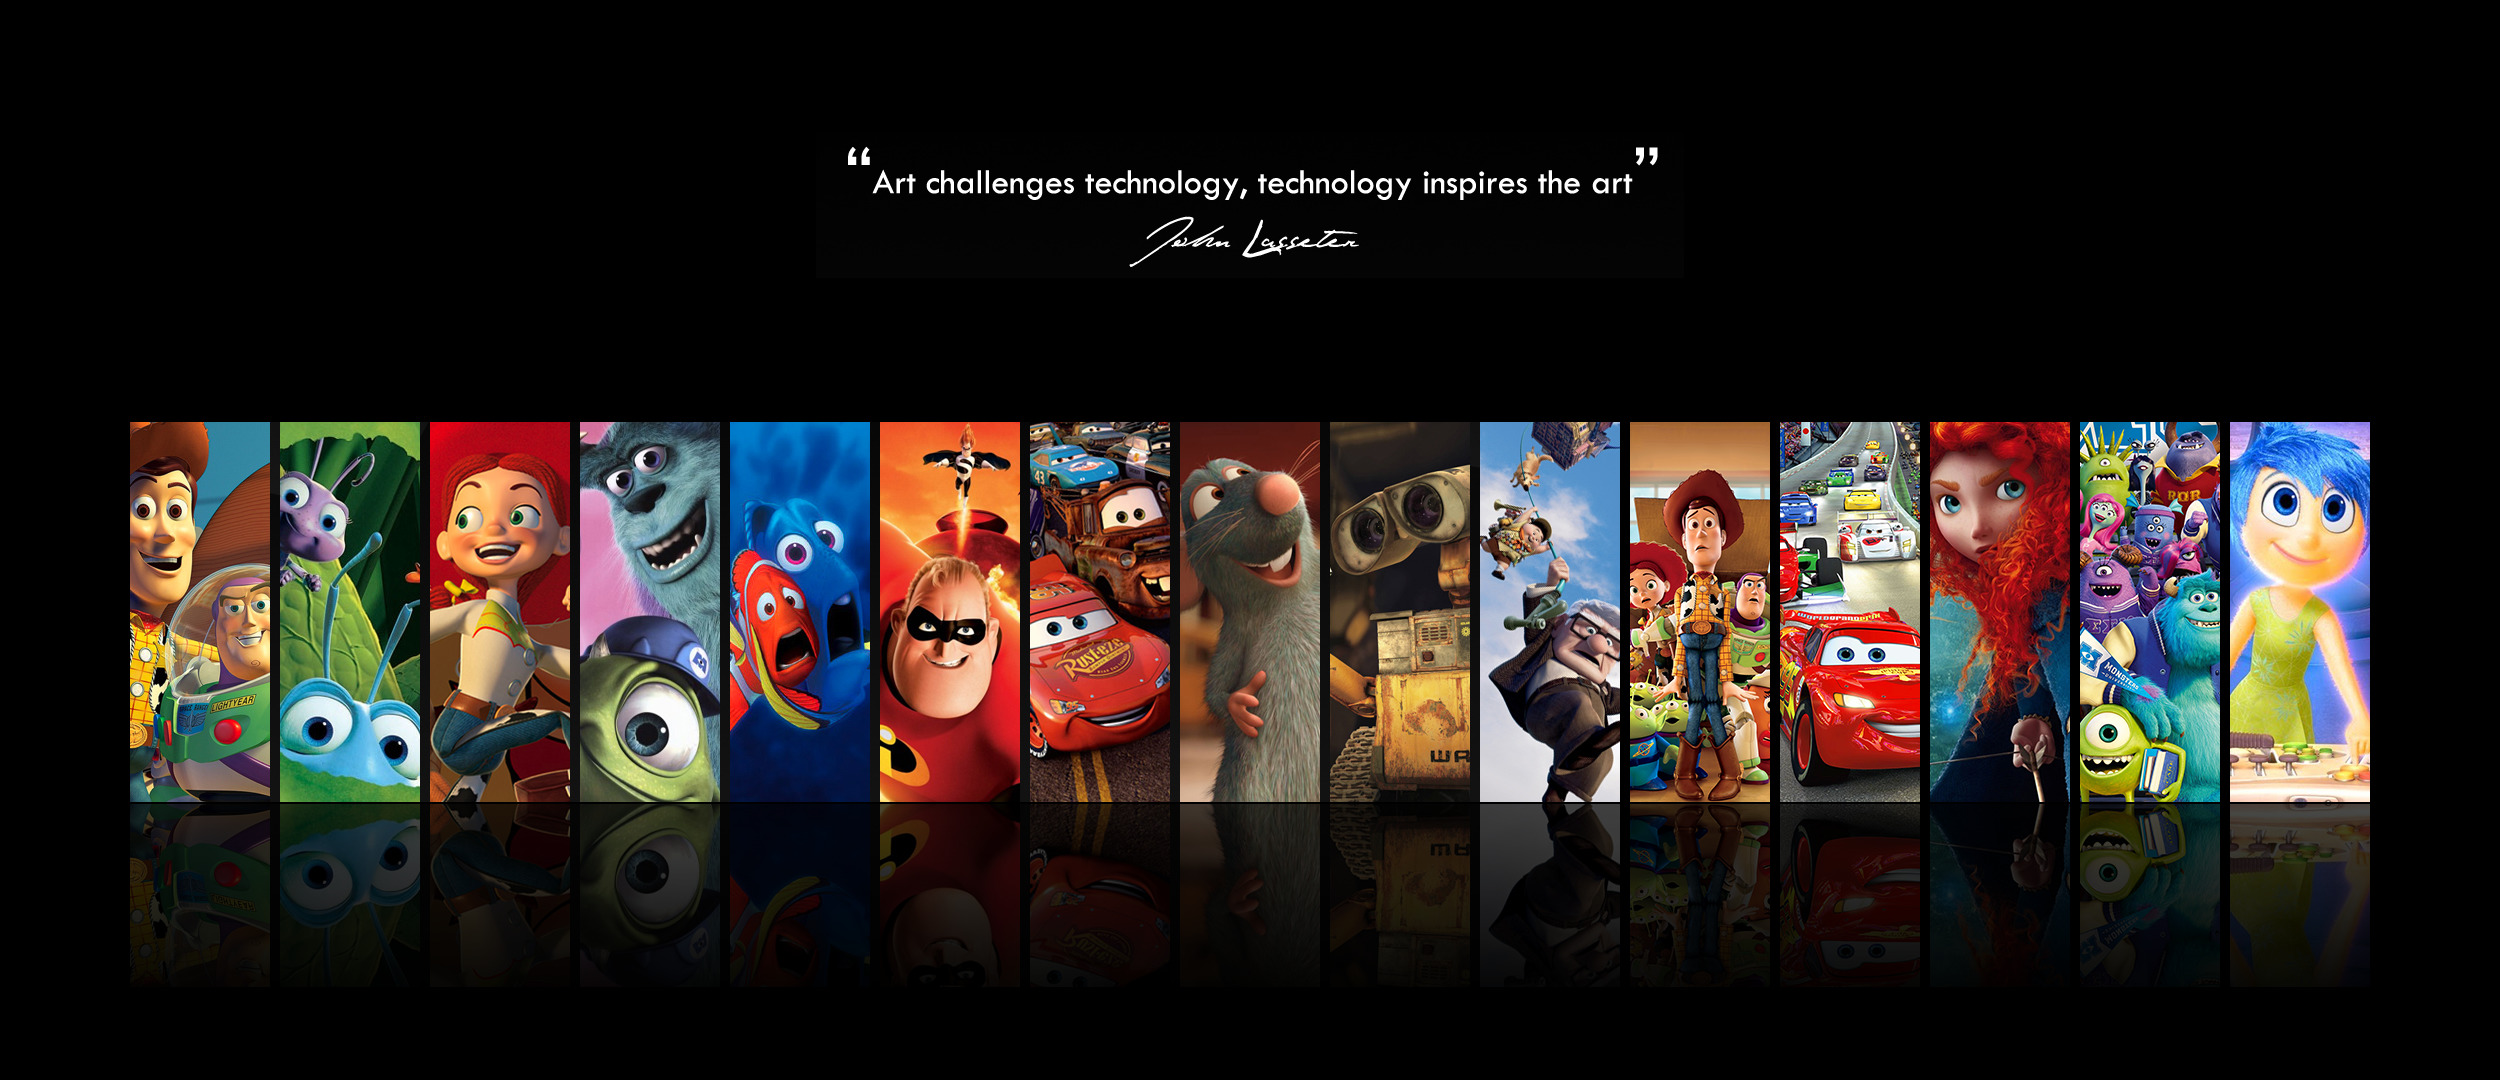 Pixar Animation Studios, Toy Story, Monsters, Inc., Finding Nemo, Cars (movie), Inside Out Wallpaper